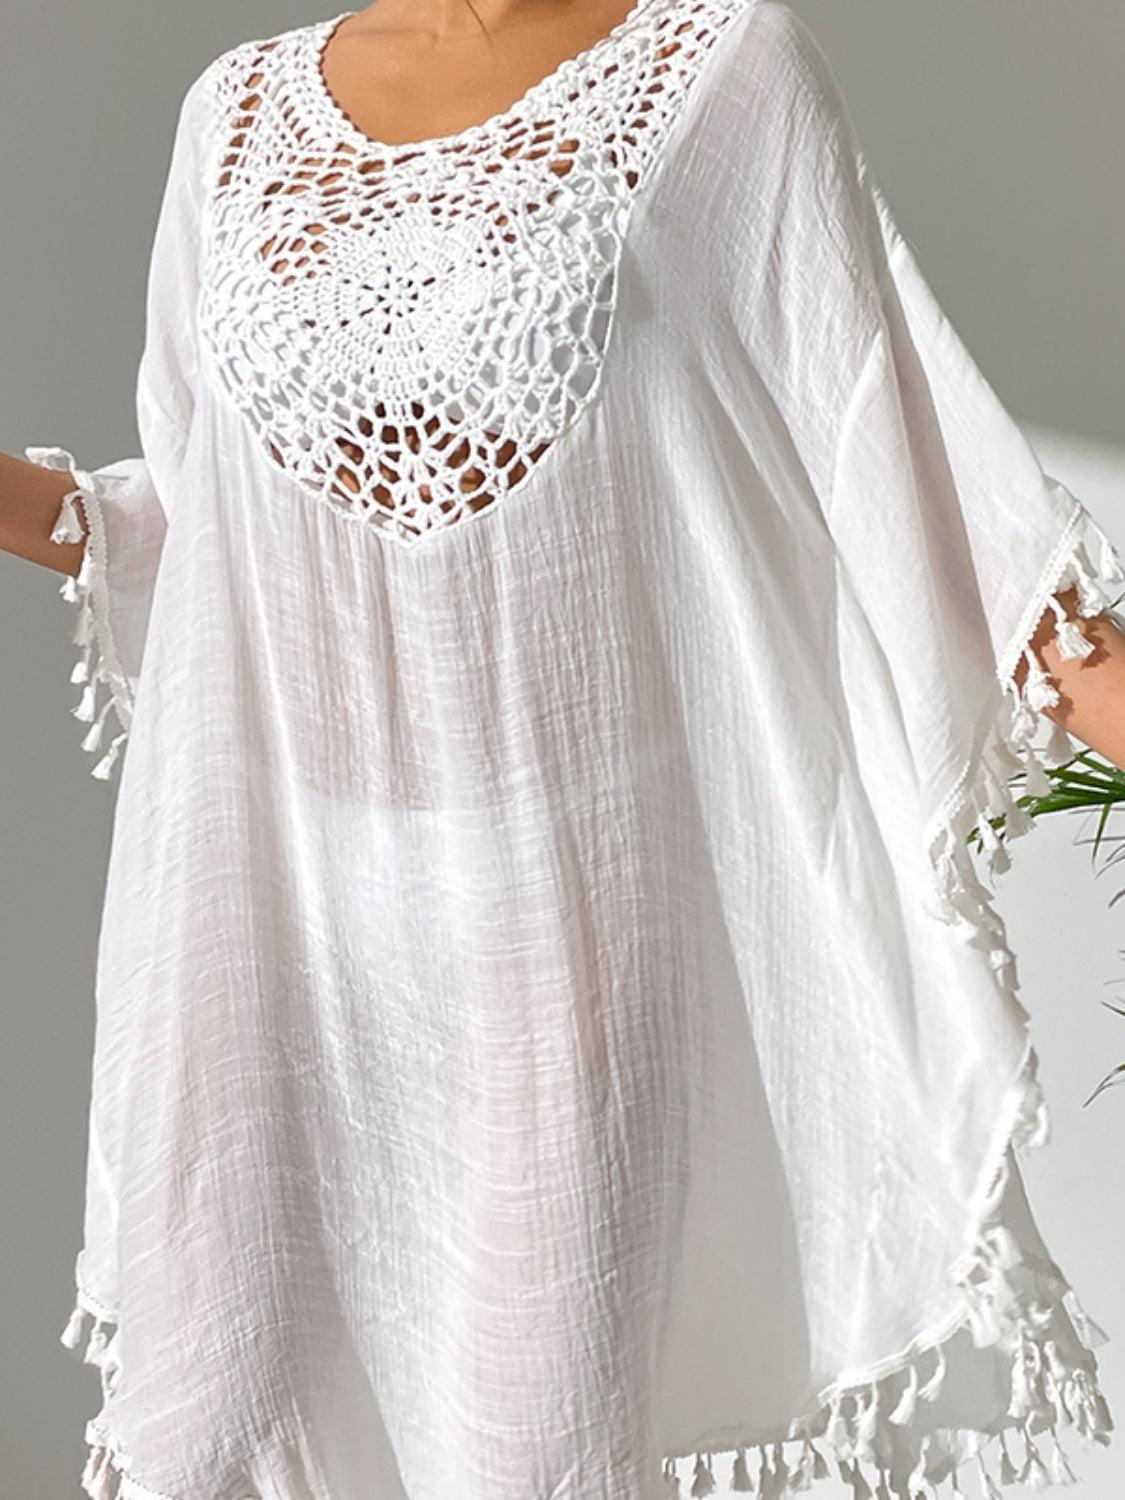 a woman wearing a white top with crochet detailing